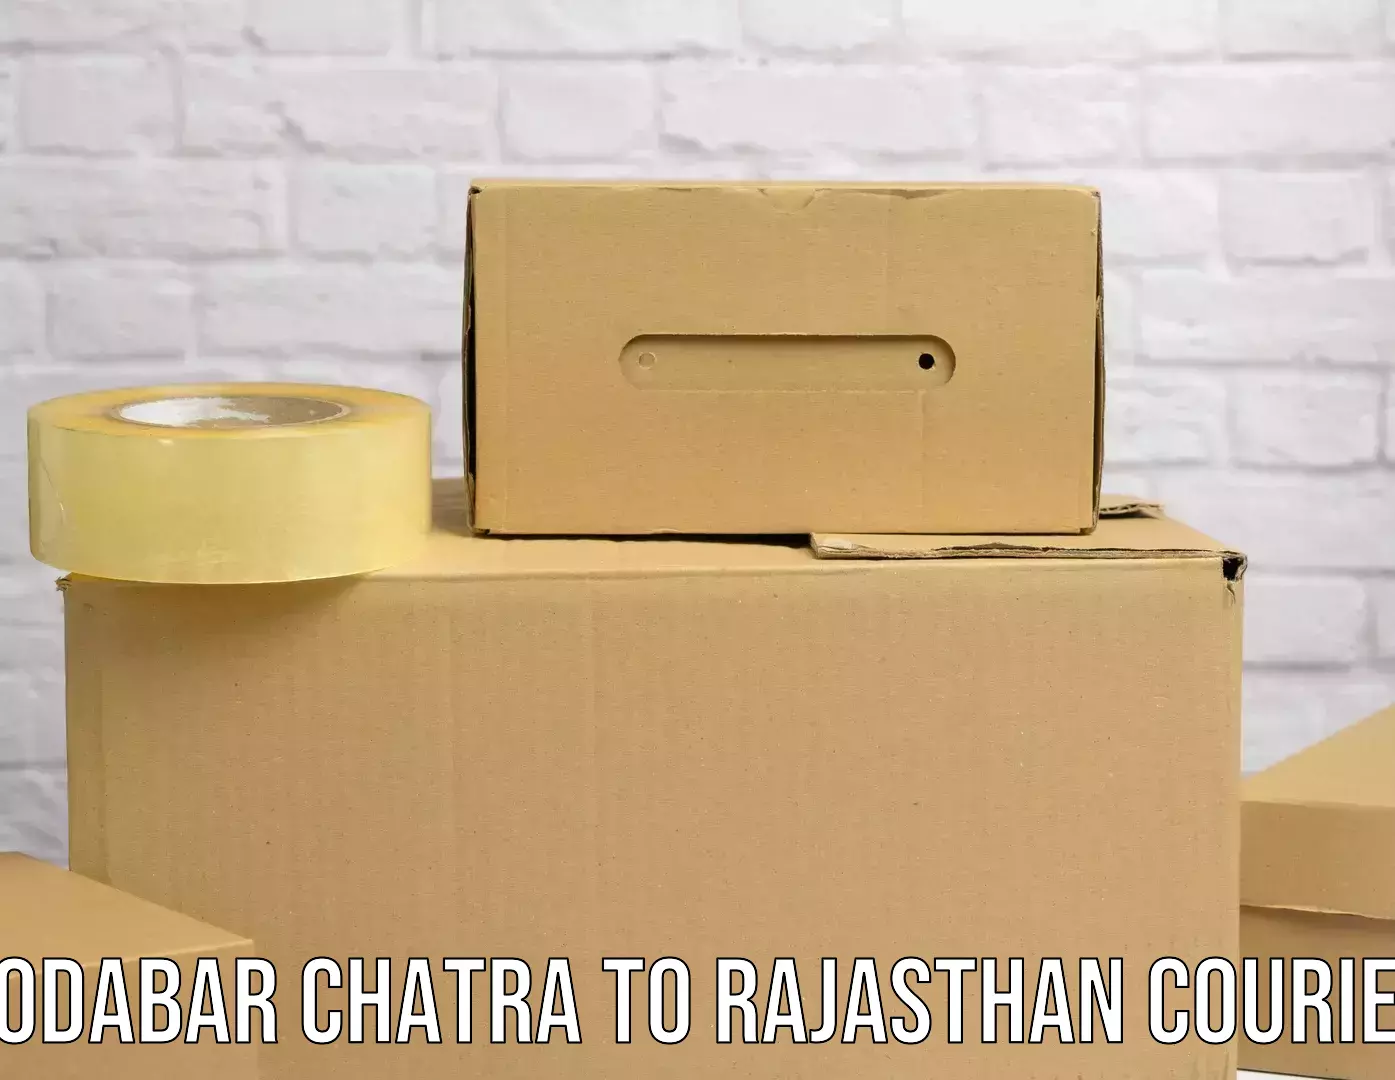 Full-service courier options Godabar Chatra to Sangaria